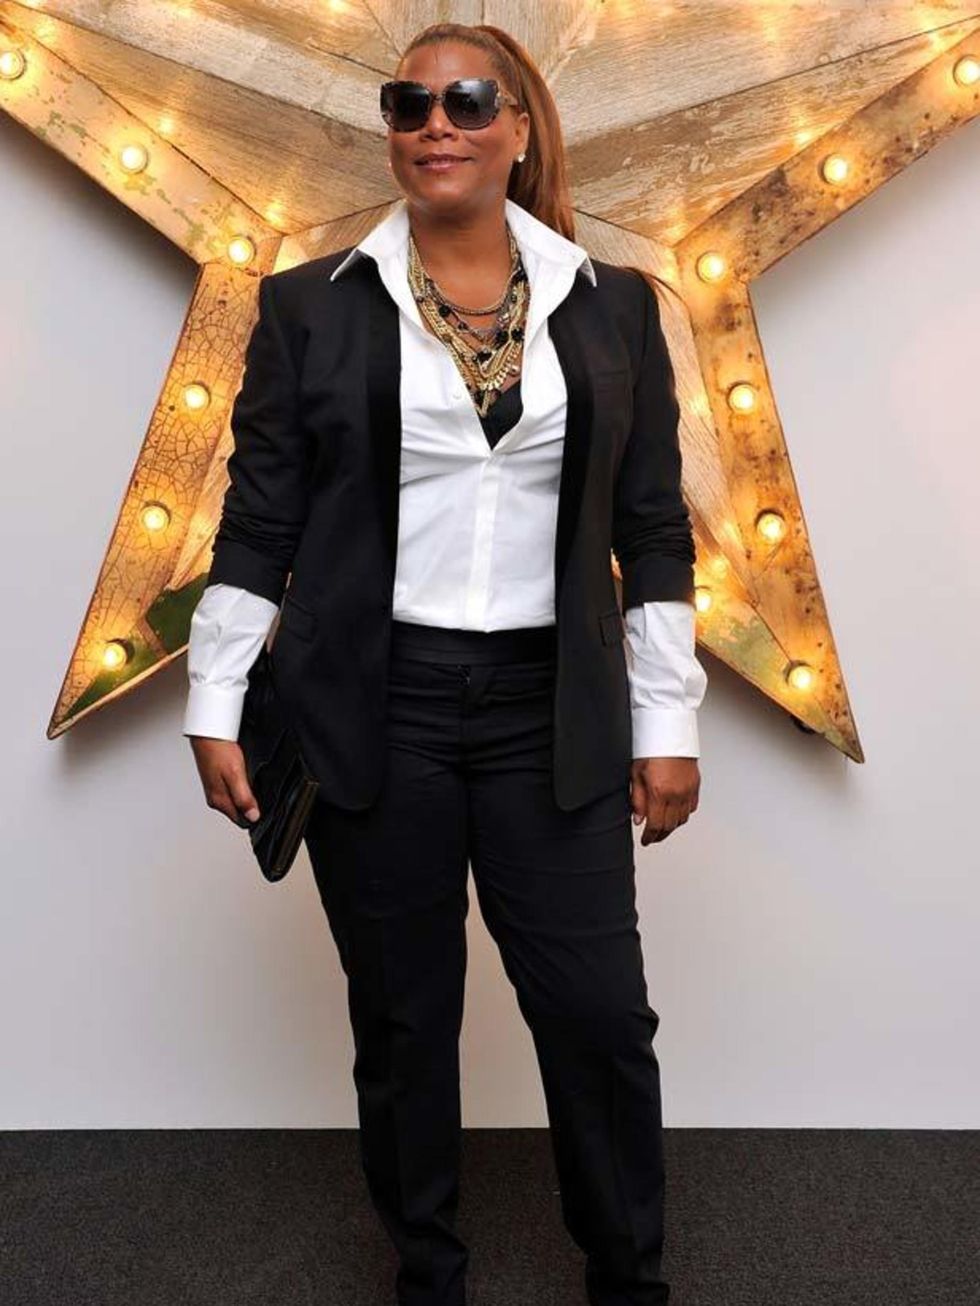 <p>Queen Latifah teamed her <a href="http://www.elleuk.com/catwalk/collections/dolce-gabbana/autumn-winter-2011">Dolce &amp; Gabbana</a> suit with a statement necklace the Net-a-Porter Party for Dolce &amp; Gabbana, 14 July 2011</p>